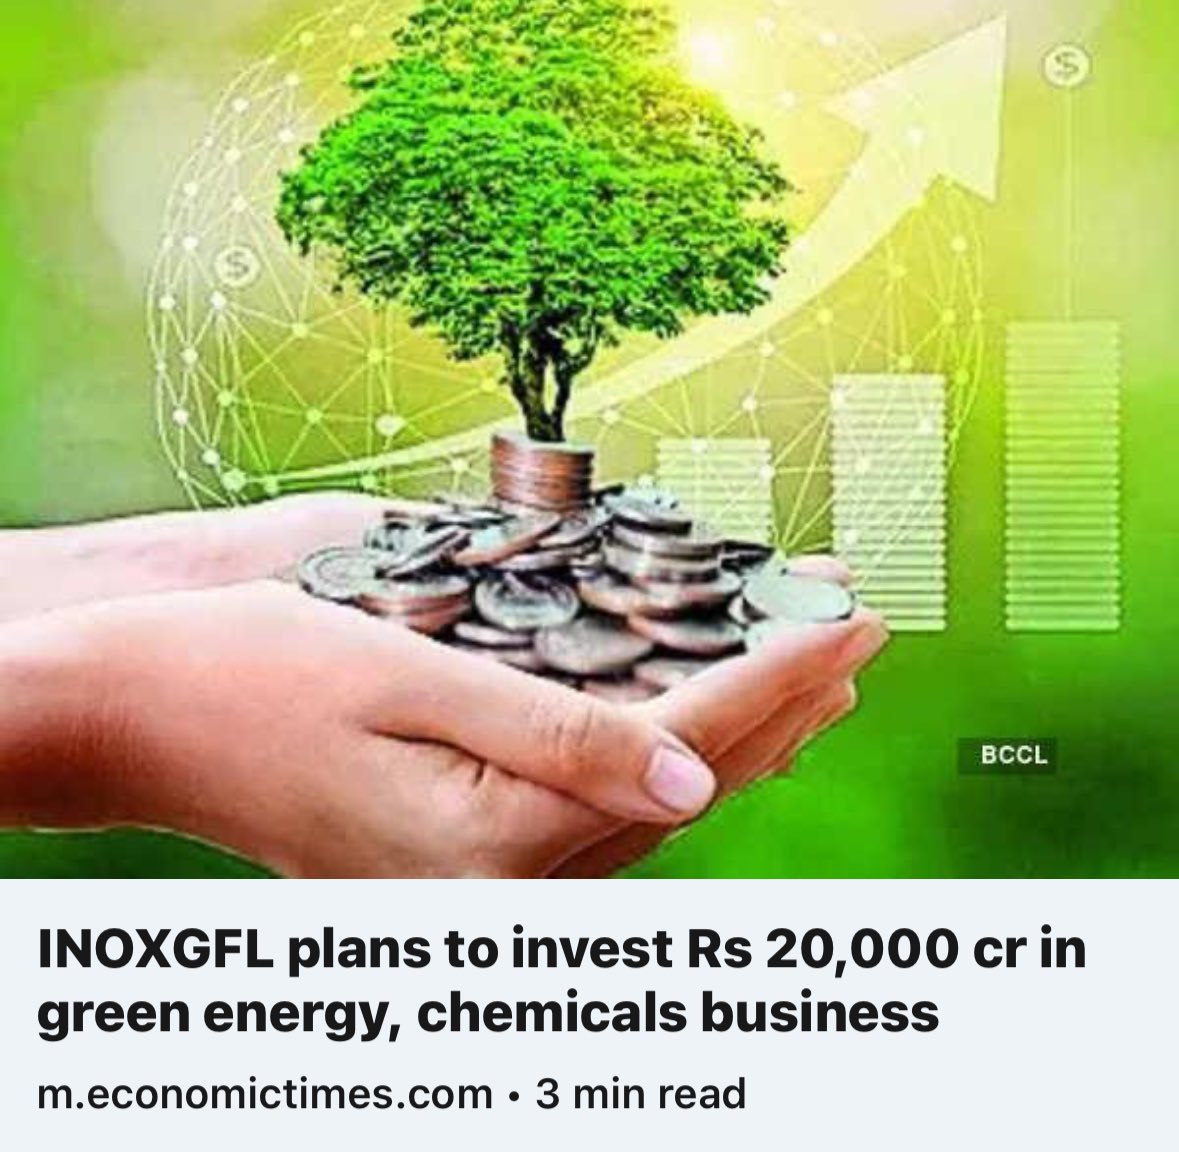 Devansh Jain, Executive Director, INOXGFL Group shares his view with @EconomicTimes on the massive growth Capex across all INOXGFL Group companies in the green energy and chemicals business space over the next 4-5 years, starting FY2025. This promising move will further bolster…